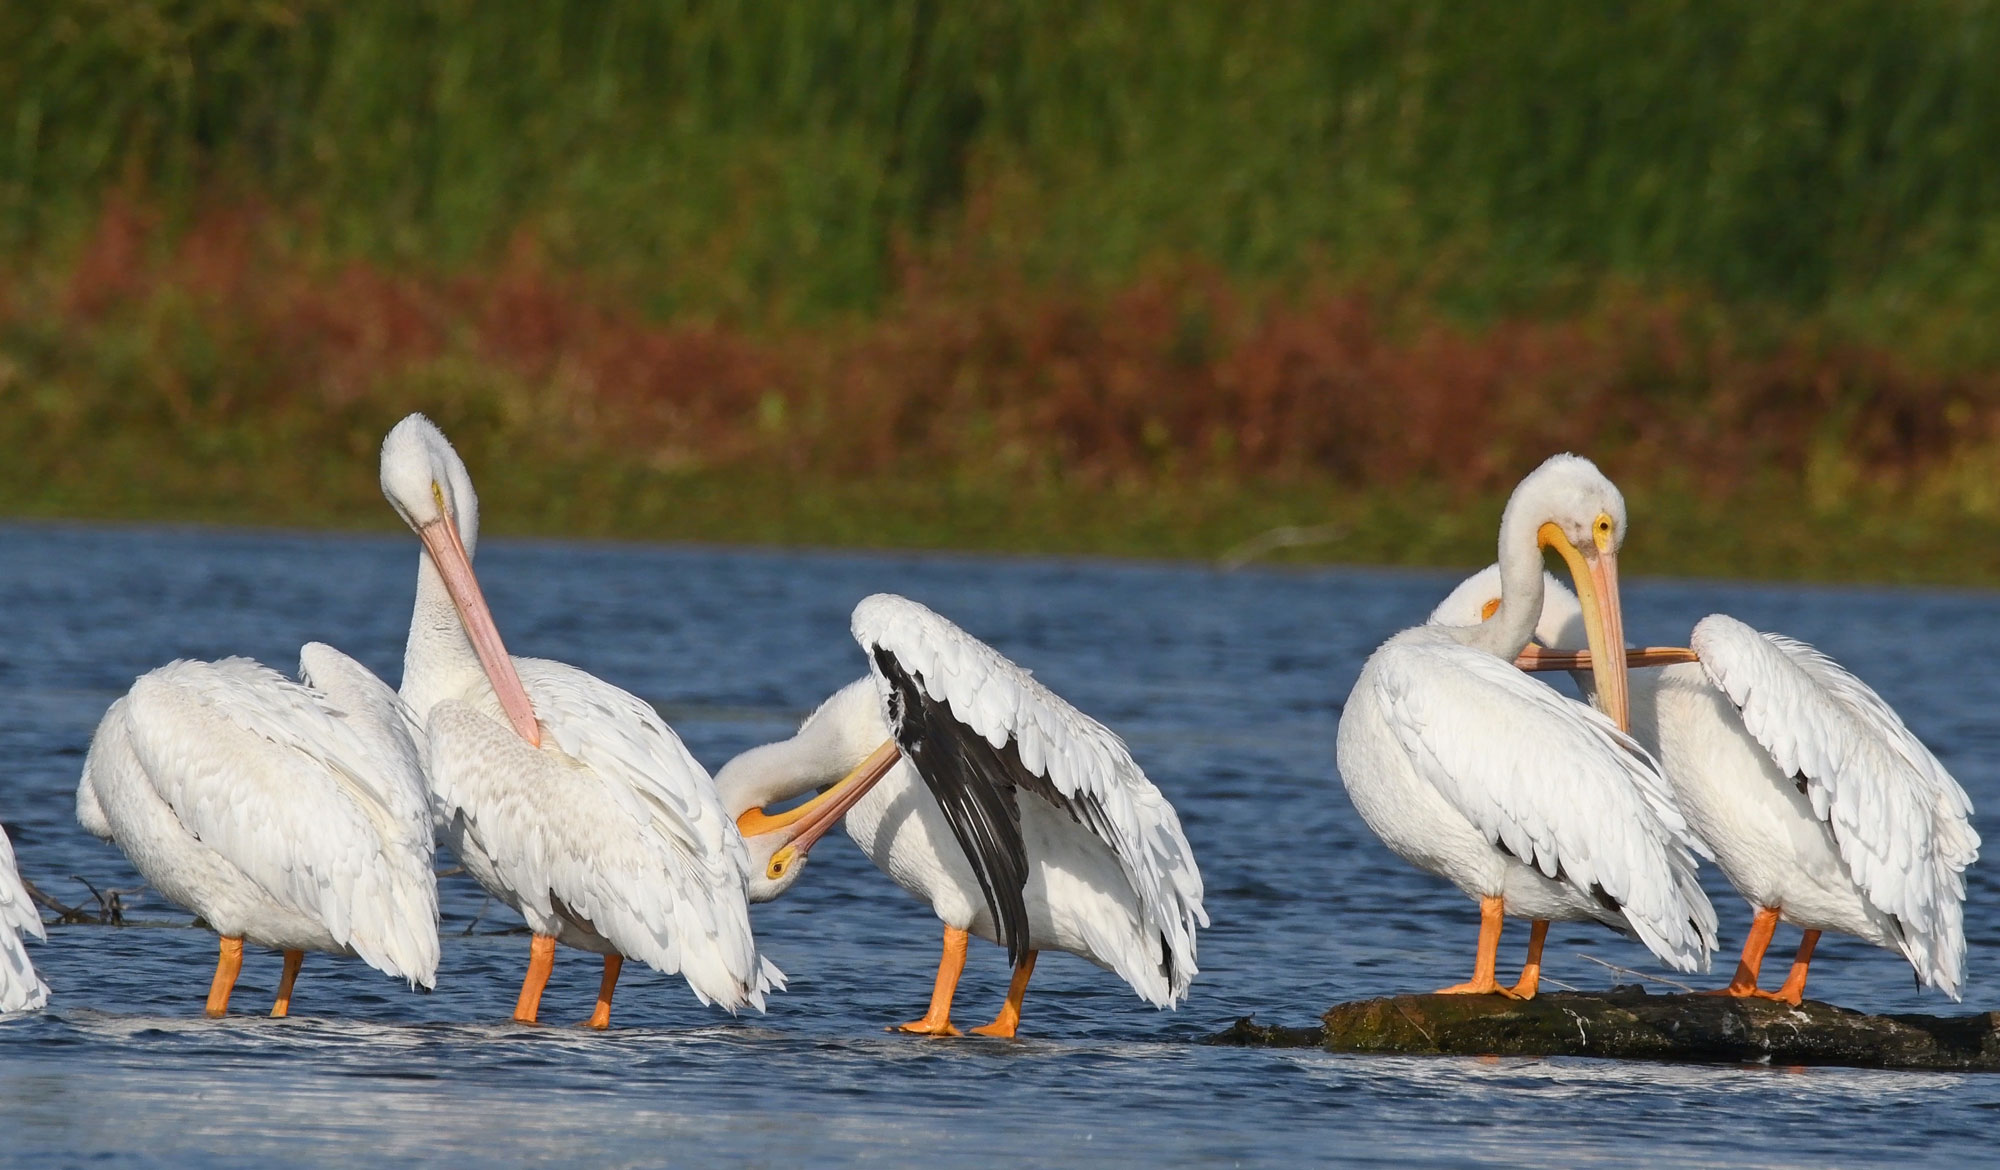 A row of pelicans on the water